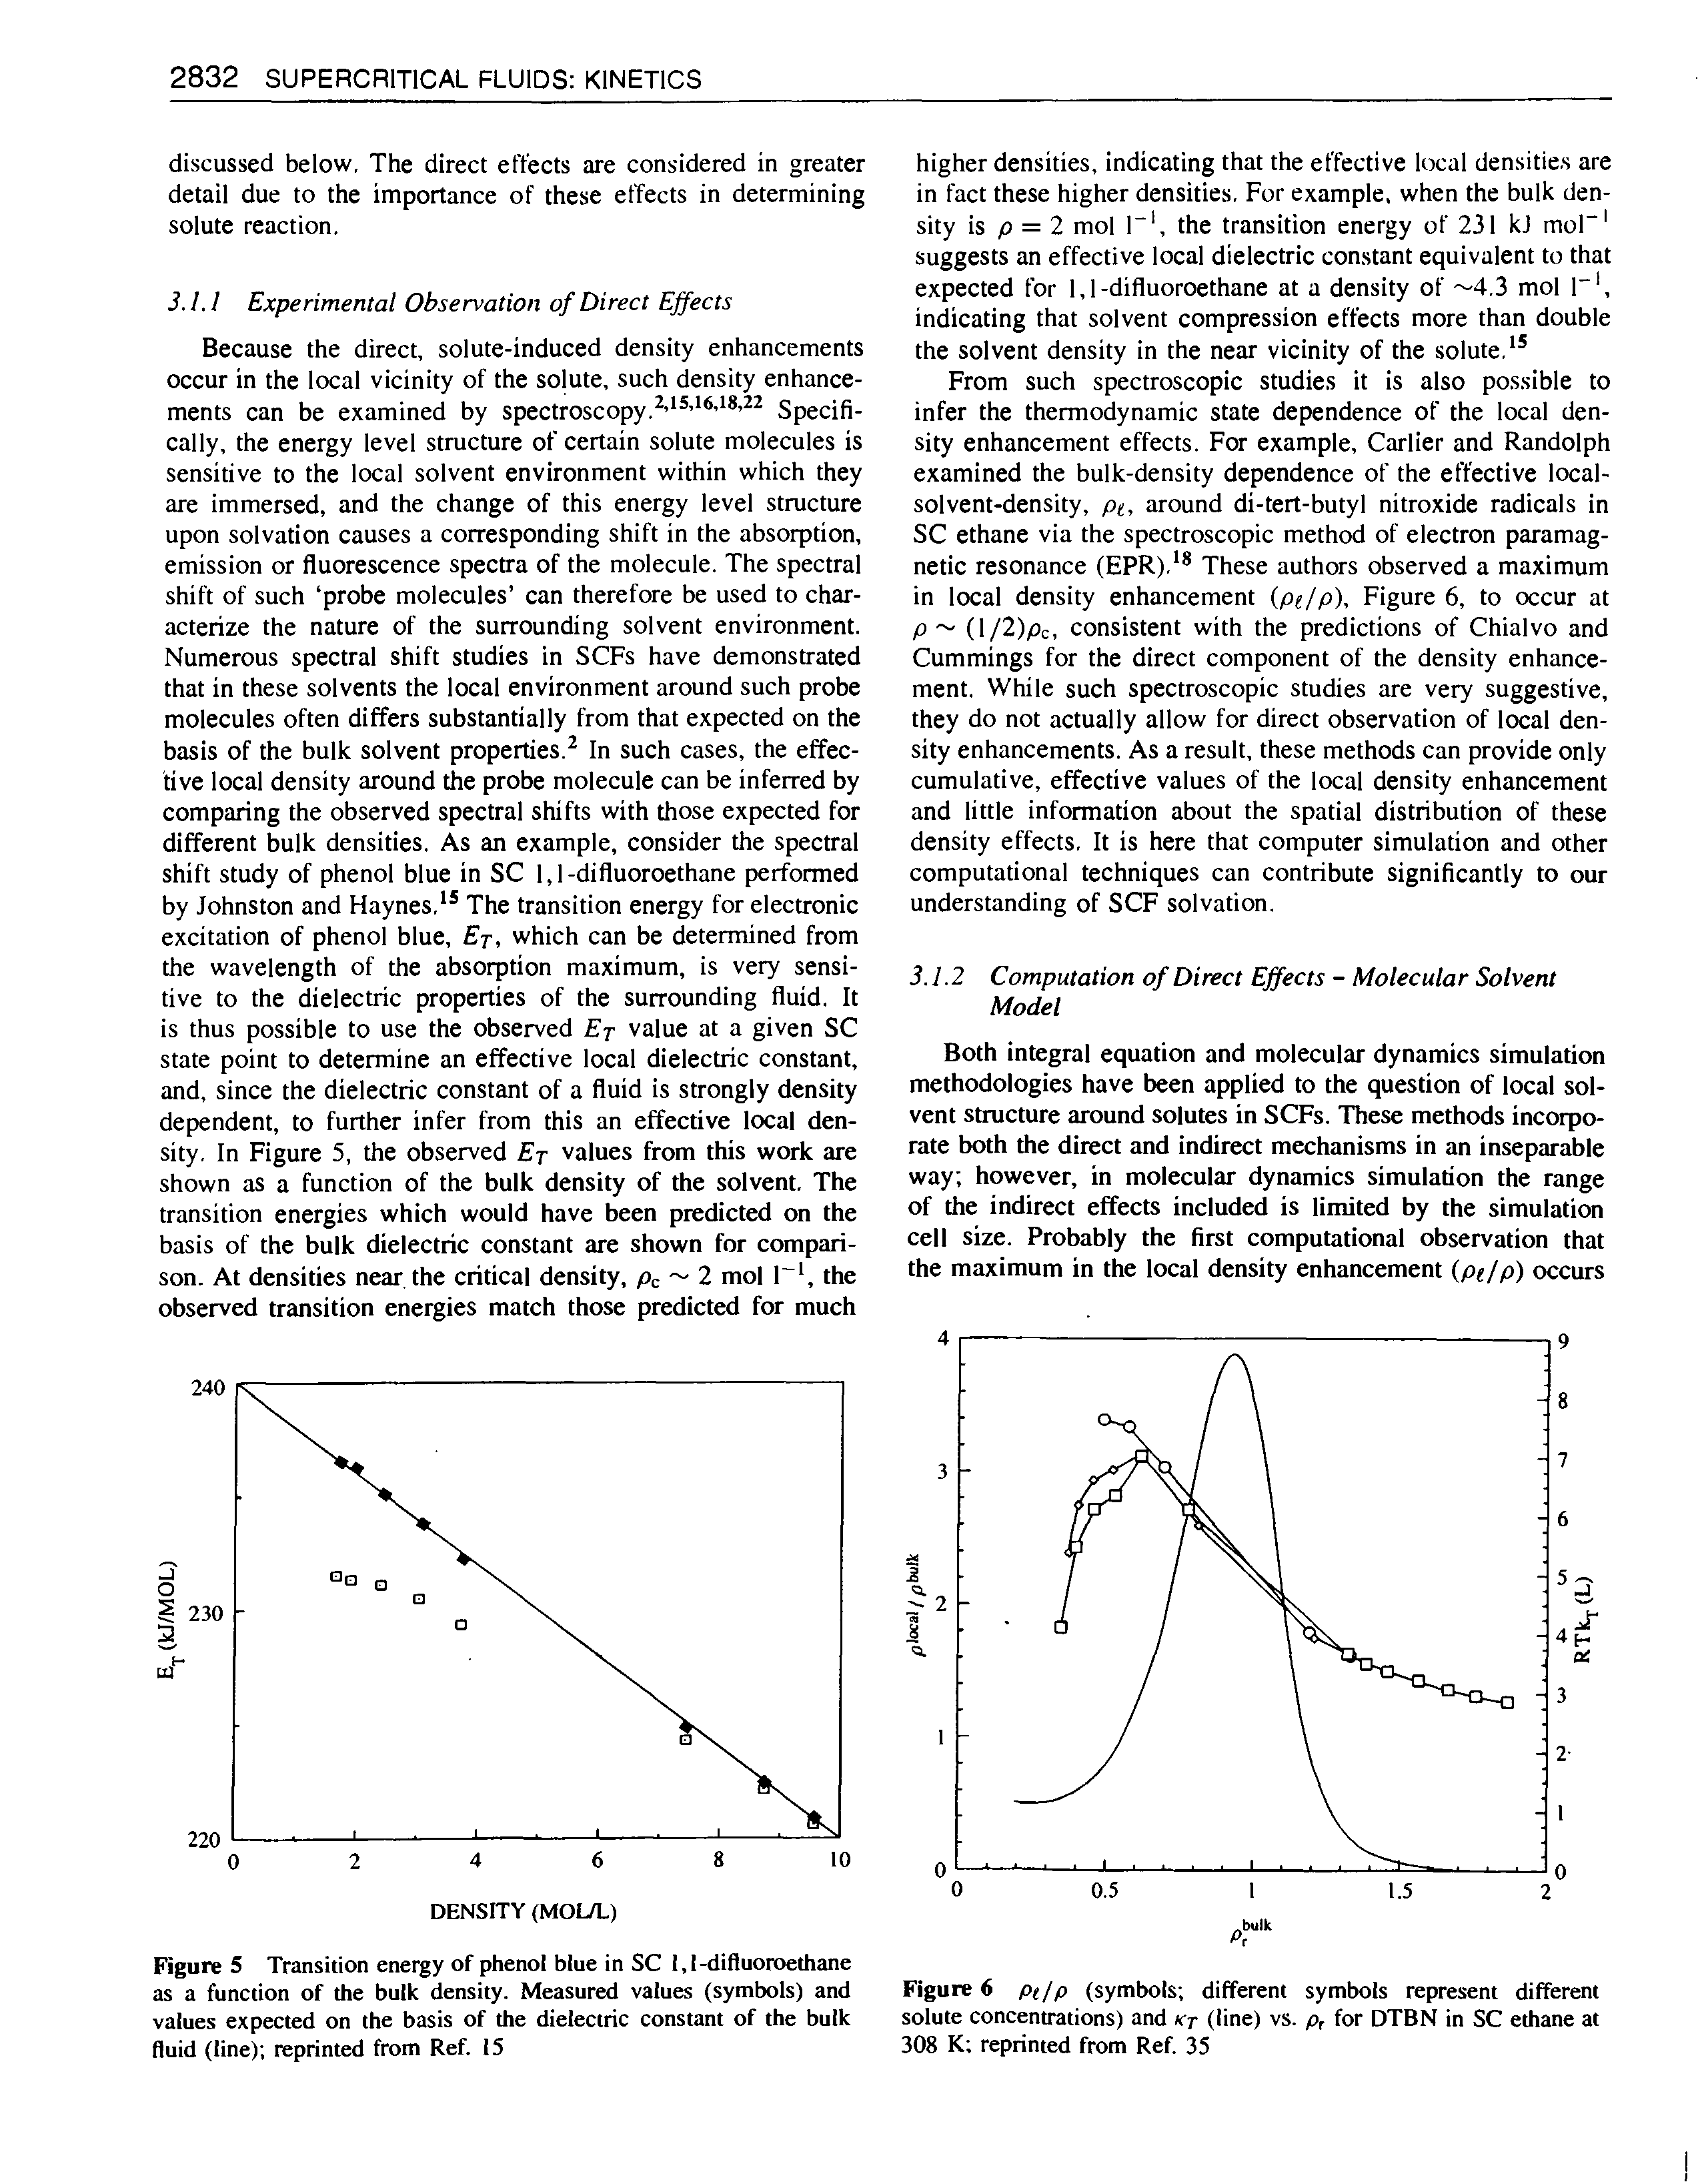 Figure 5 Transition energy of phenol blue in SC 1,1-difluoroethane as a function of the bulk density. Measured values (symbols) and values expected on the basis of the dielectric constant of the bulk fluid (line) reprinted from Ref. 15...